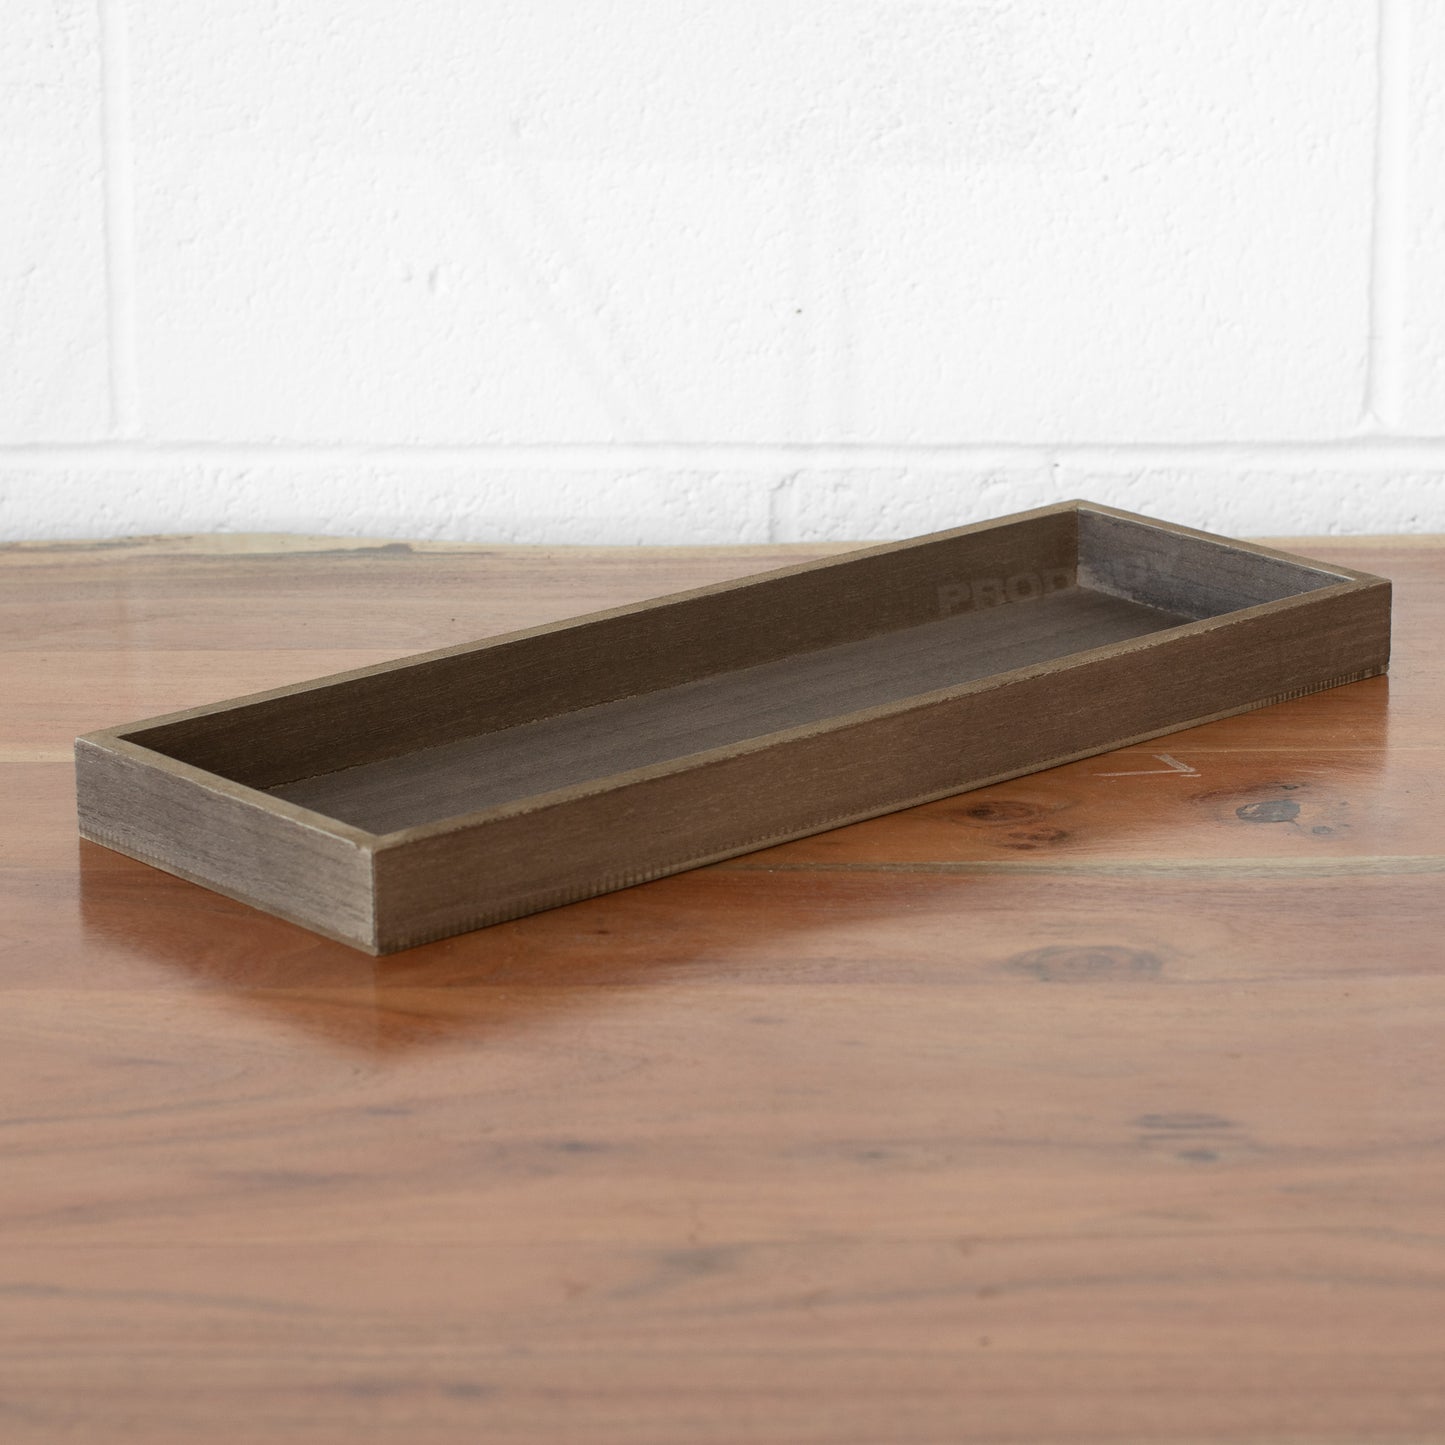 40cm Decorative Wooden Candle Storage Tray